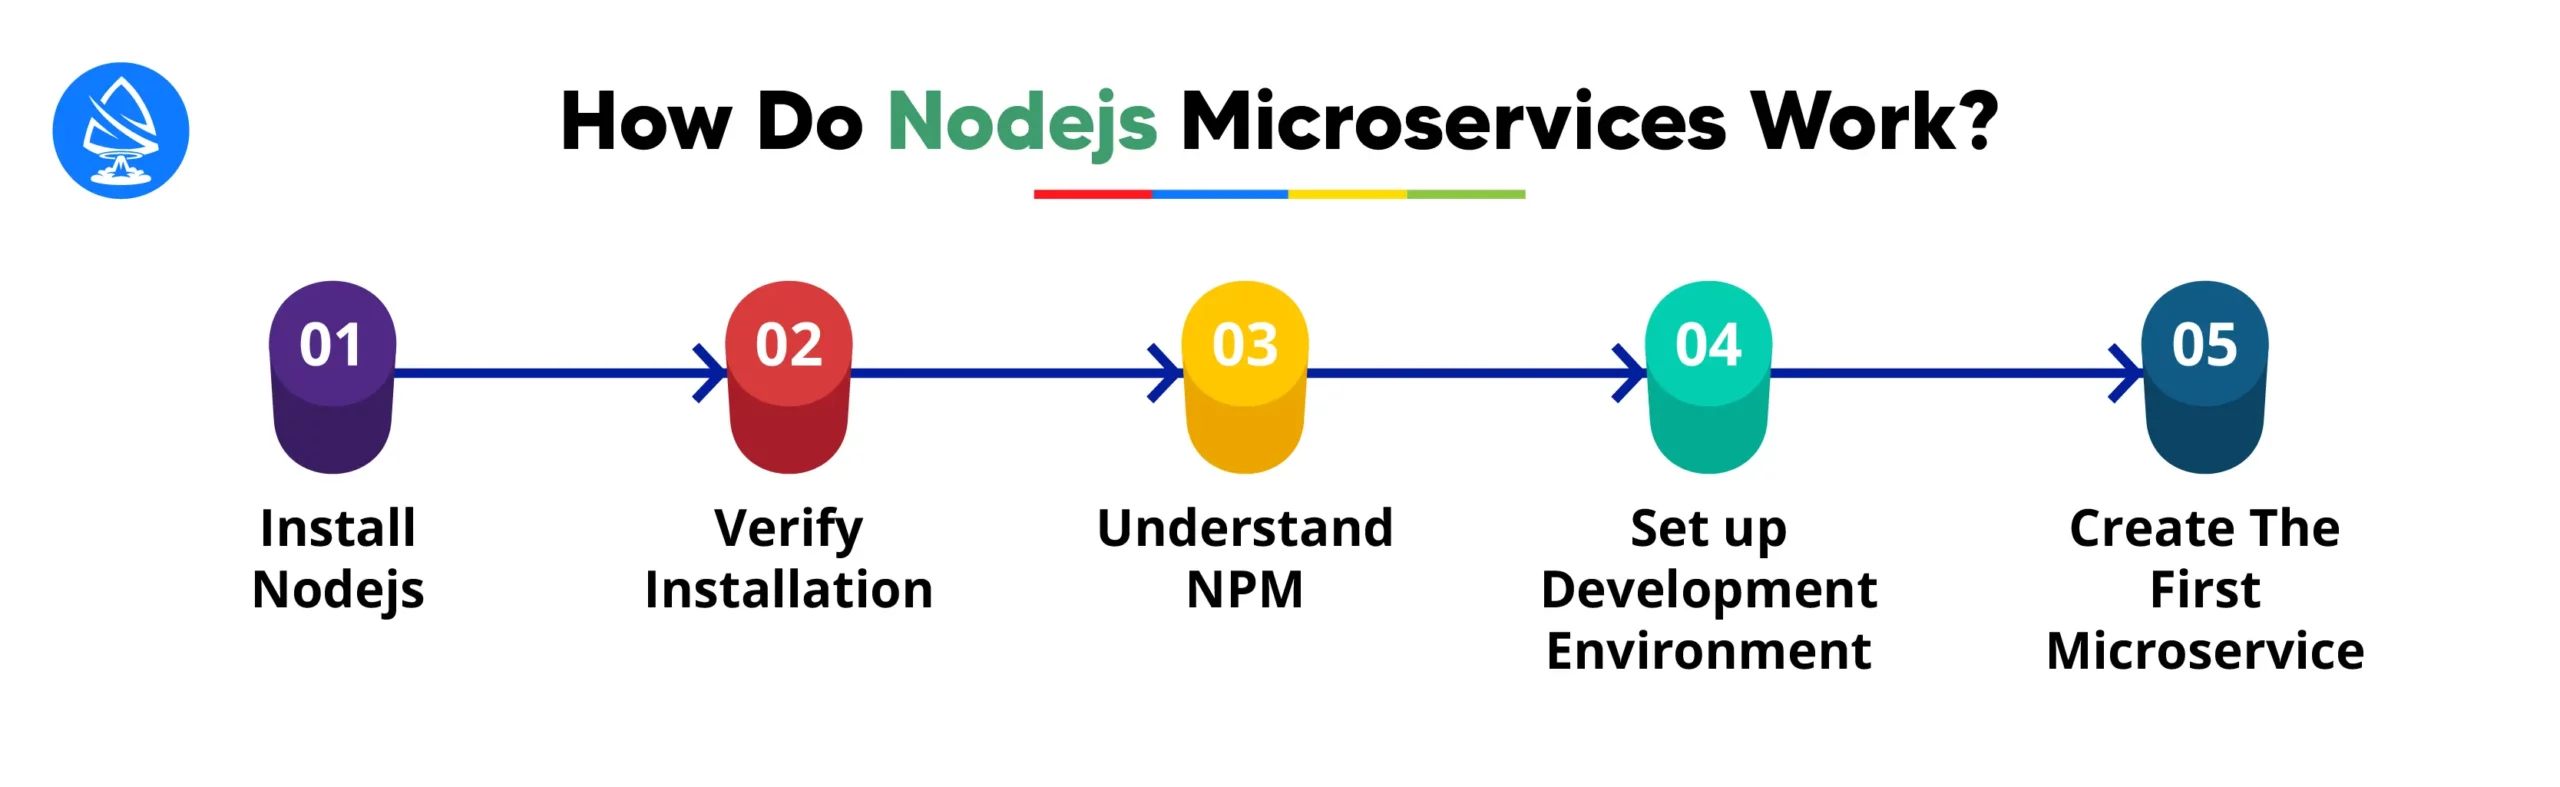 Getting Started with Node JS for Microservices 